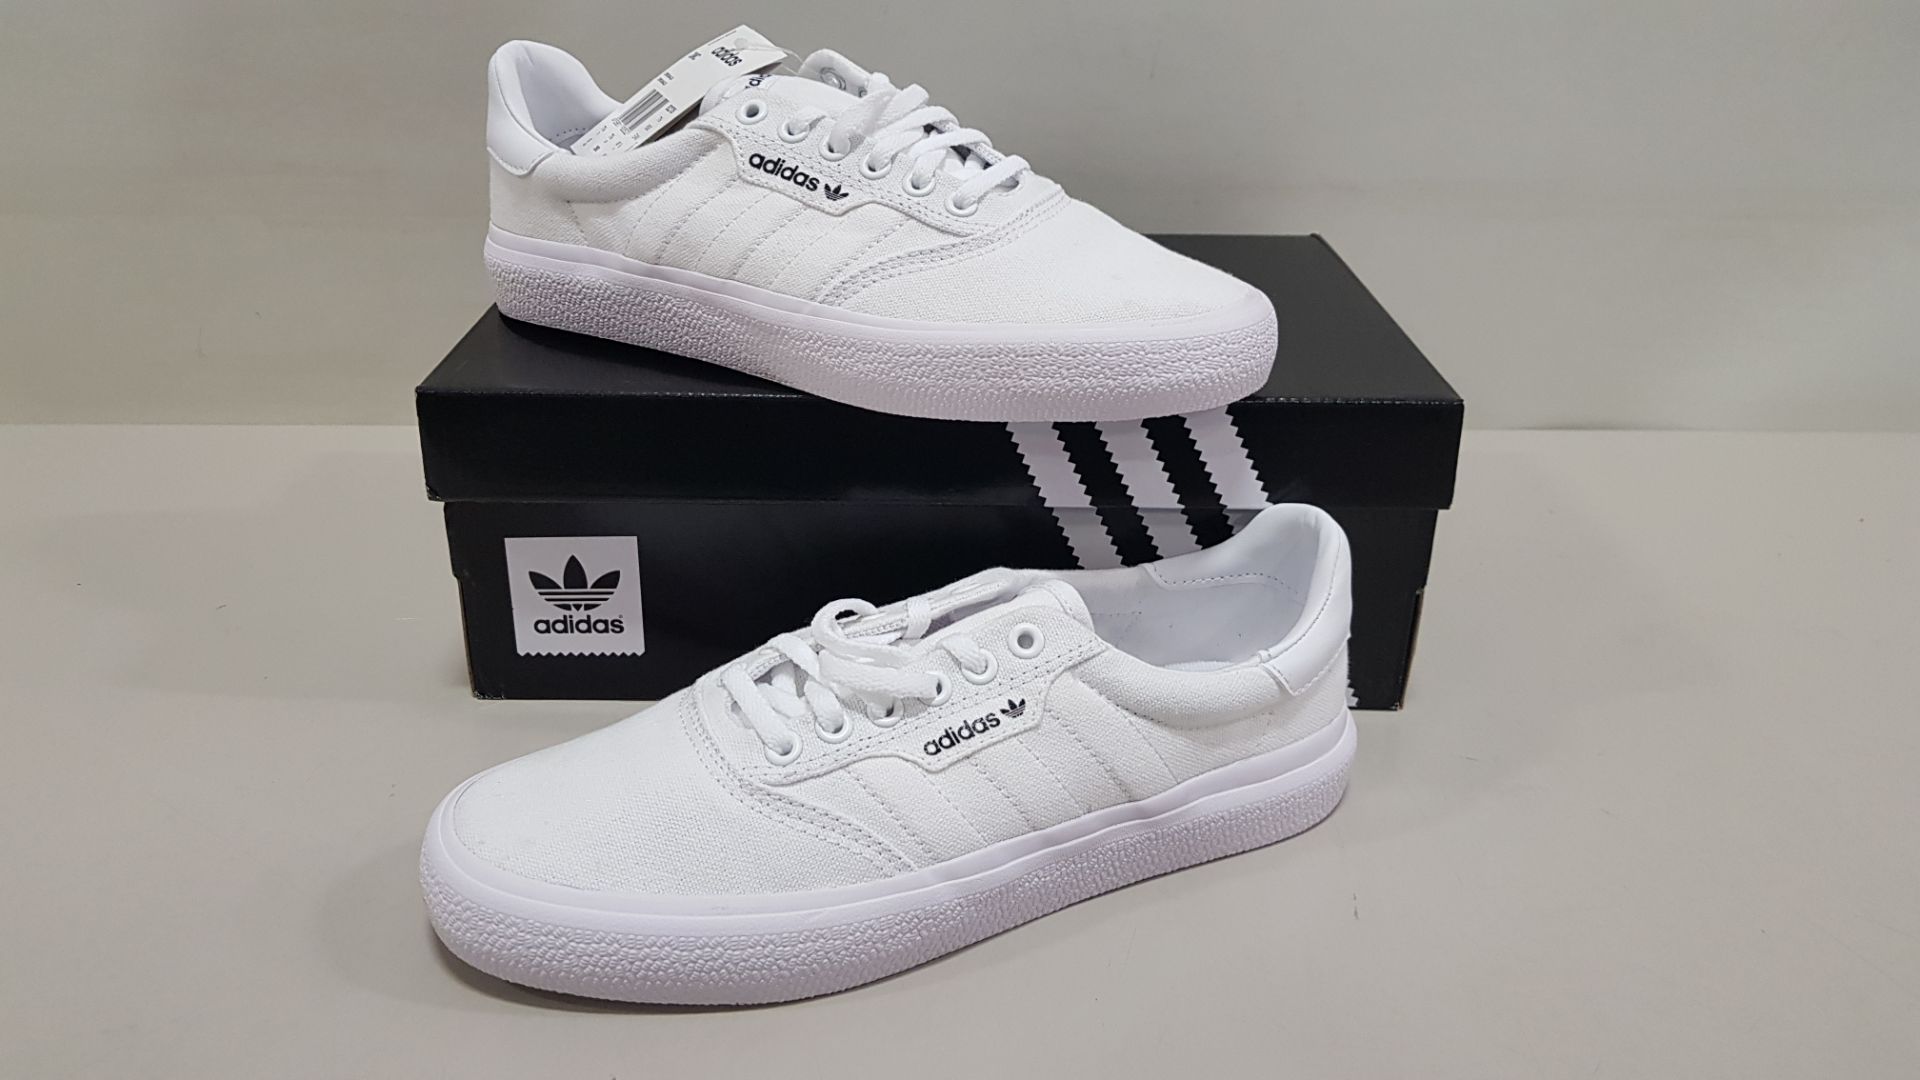 6 X ADIDAS ORIGINALS TRIPLE WHITE 3MC TRAINERS UK SIZE 6.5 AND 6 (PLEASE NOTE SOME SHOES ARE